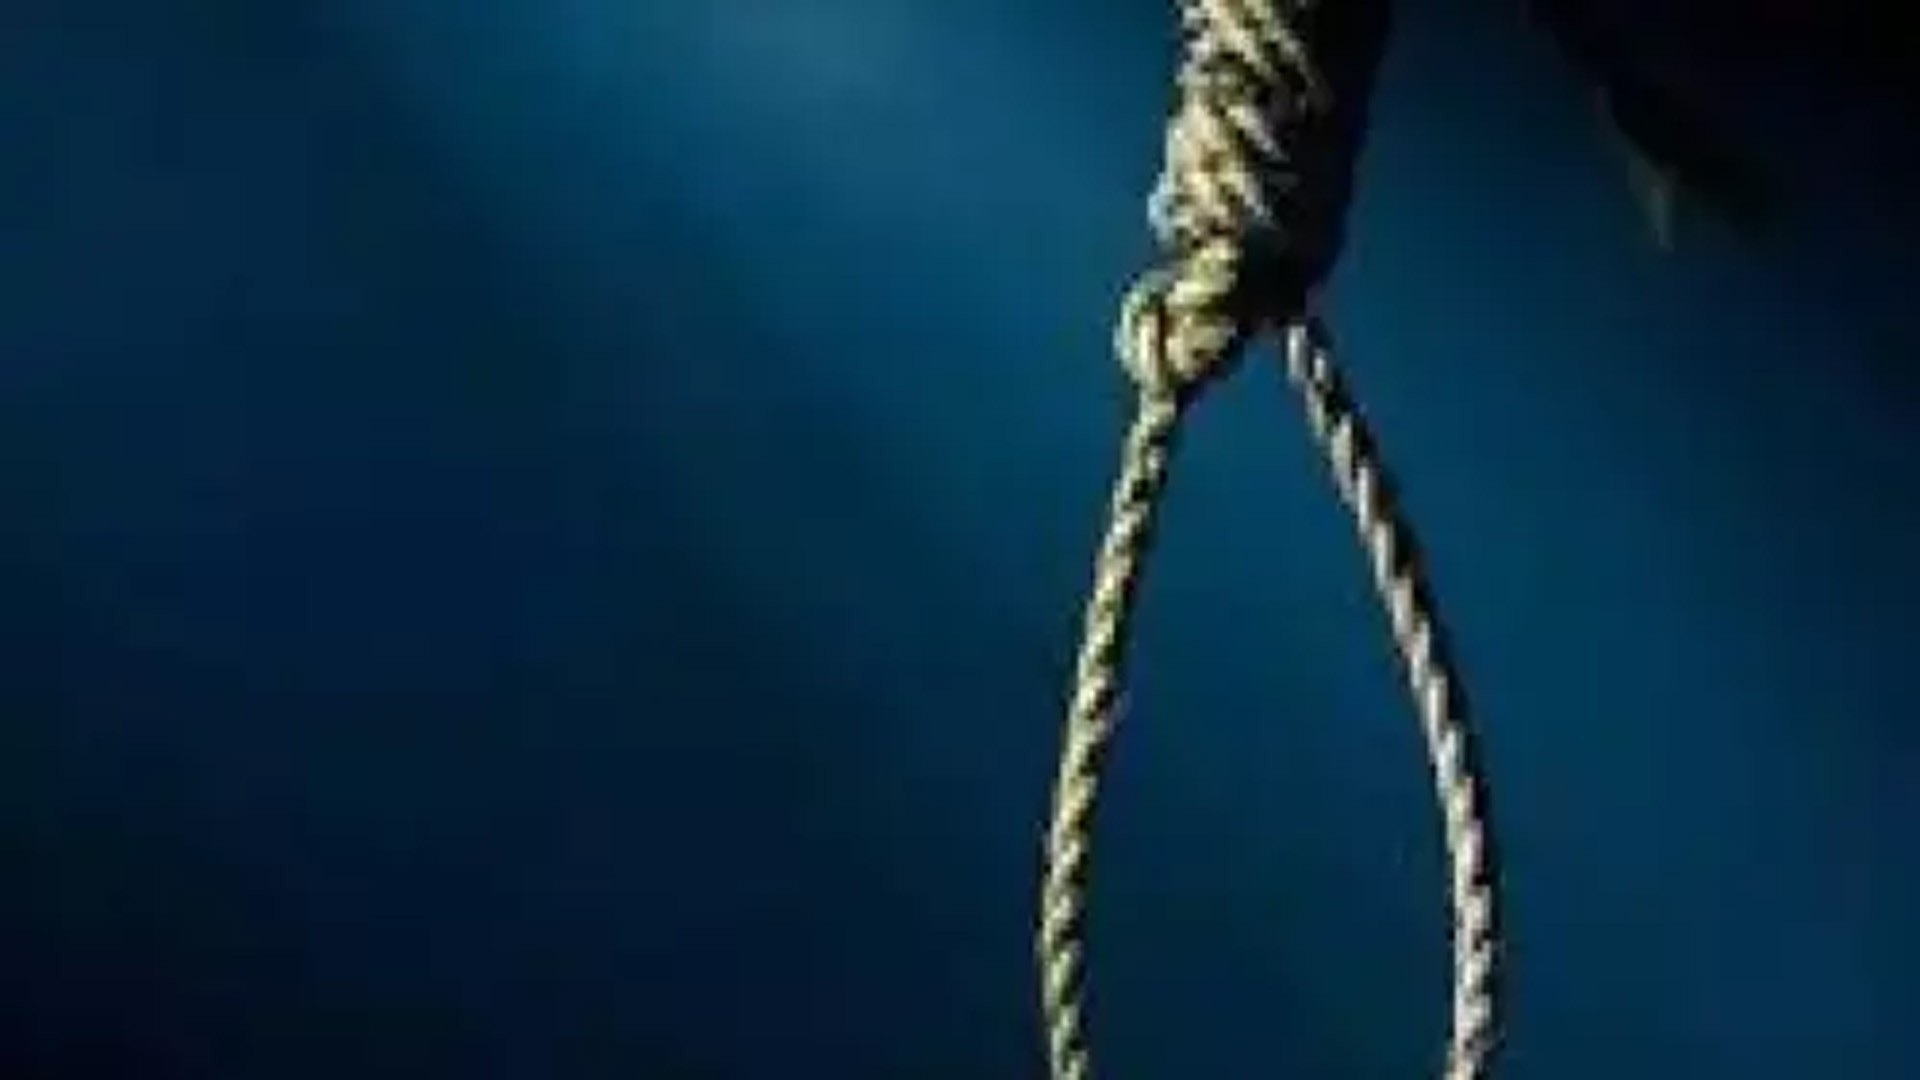 After a fight with husband, a woman committed suicide by hanging herself from a fan